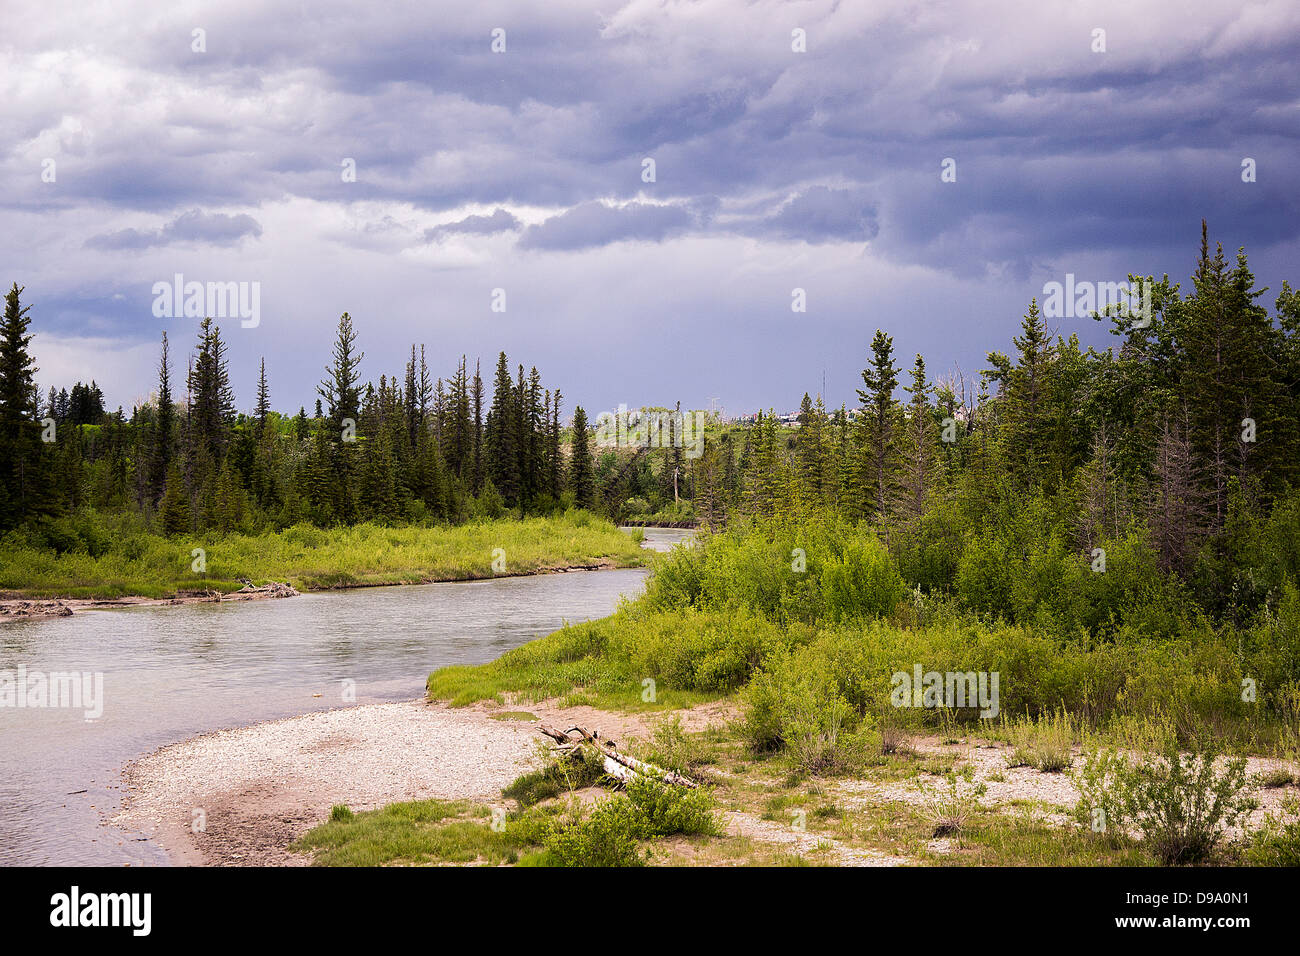 Elbow river, landscape, river, storm, thunder, spring, summer, hike, path, fishing Stock Photo